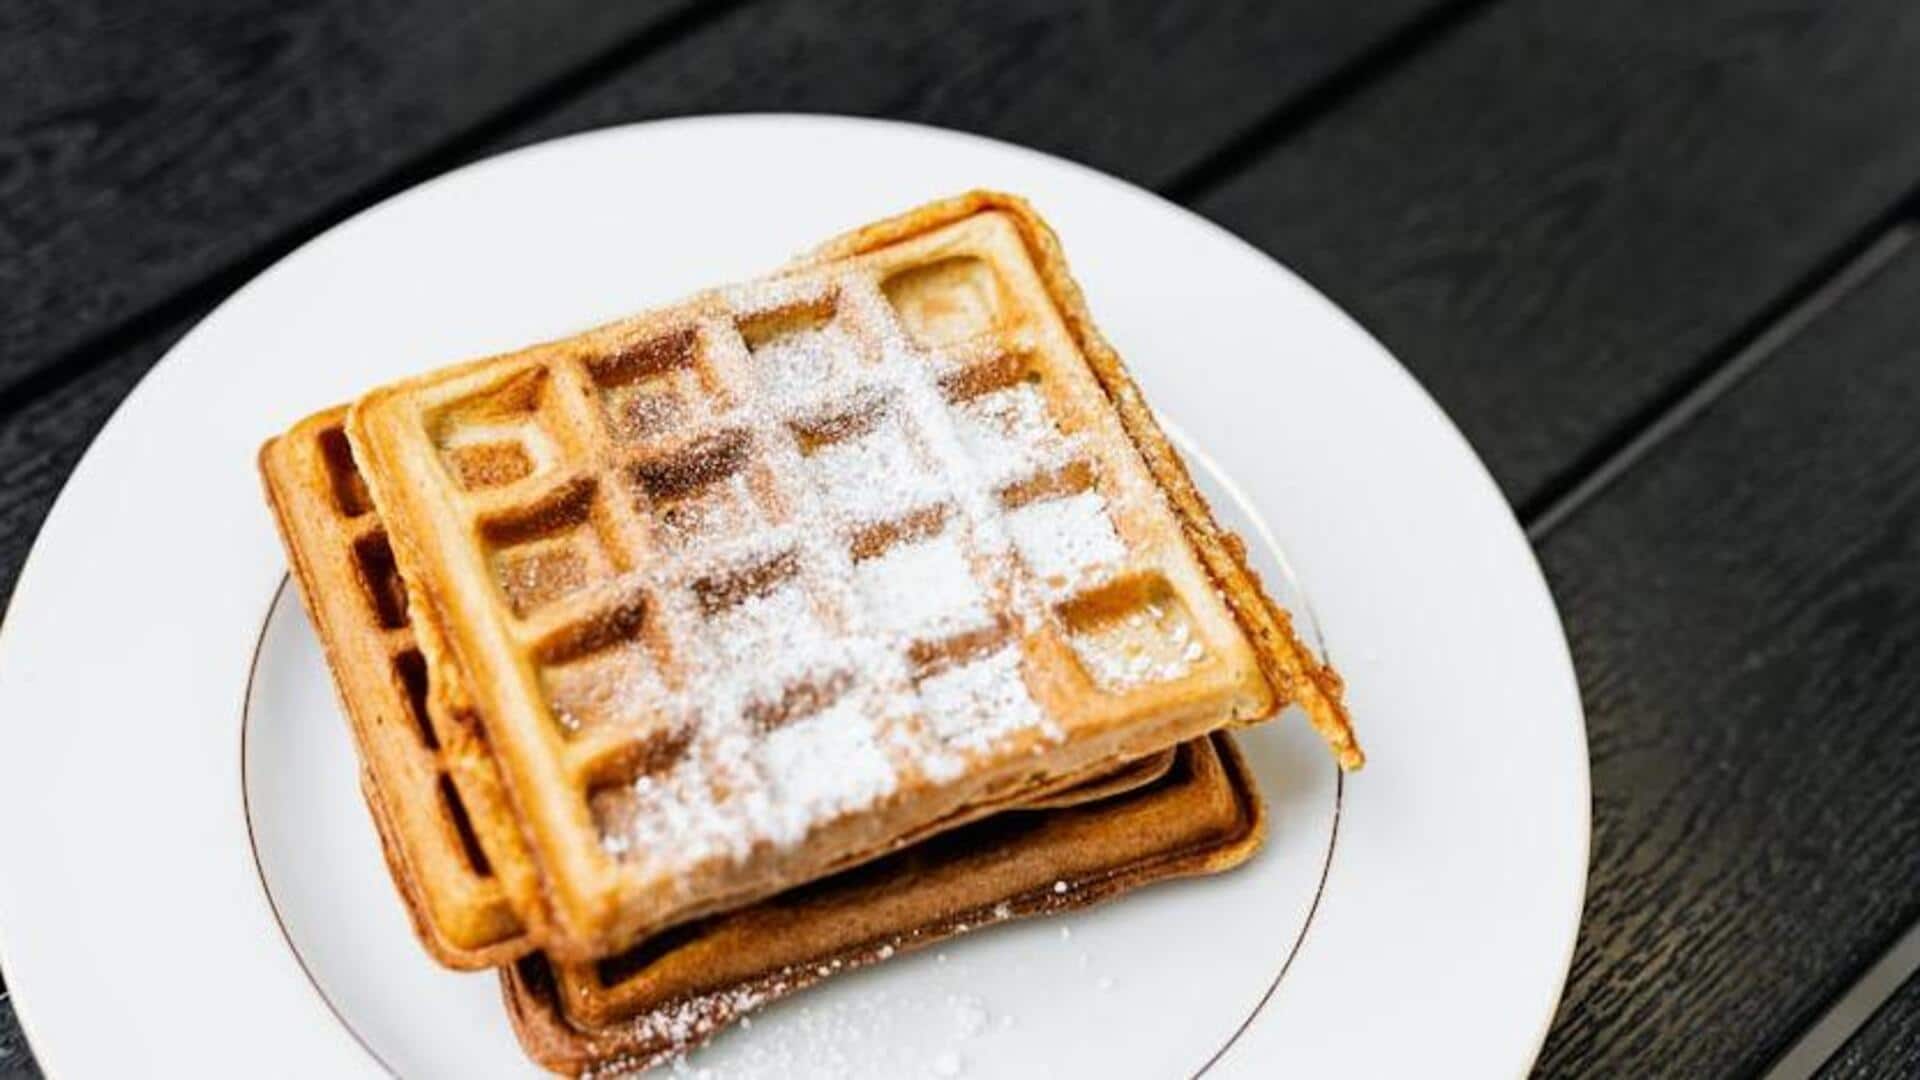 Impress your guests with this vegan Belgian waffle recipe